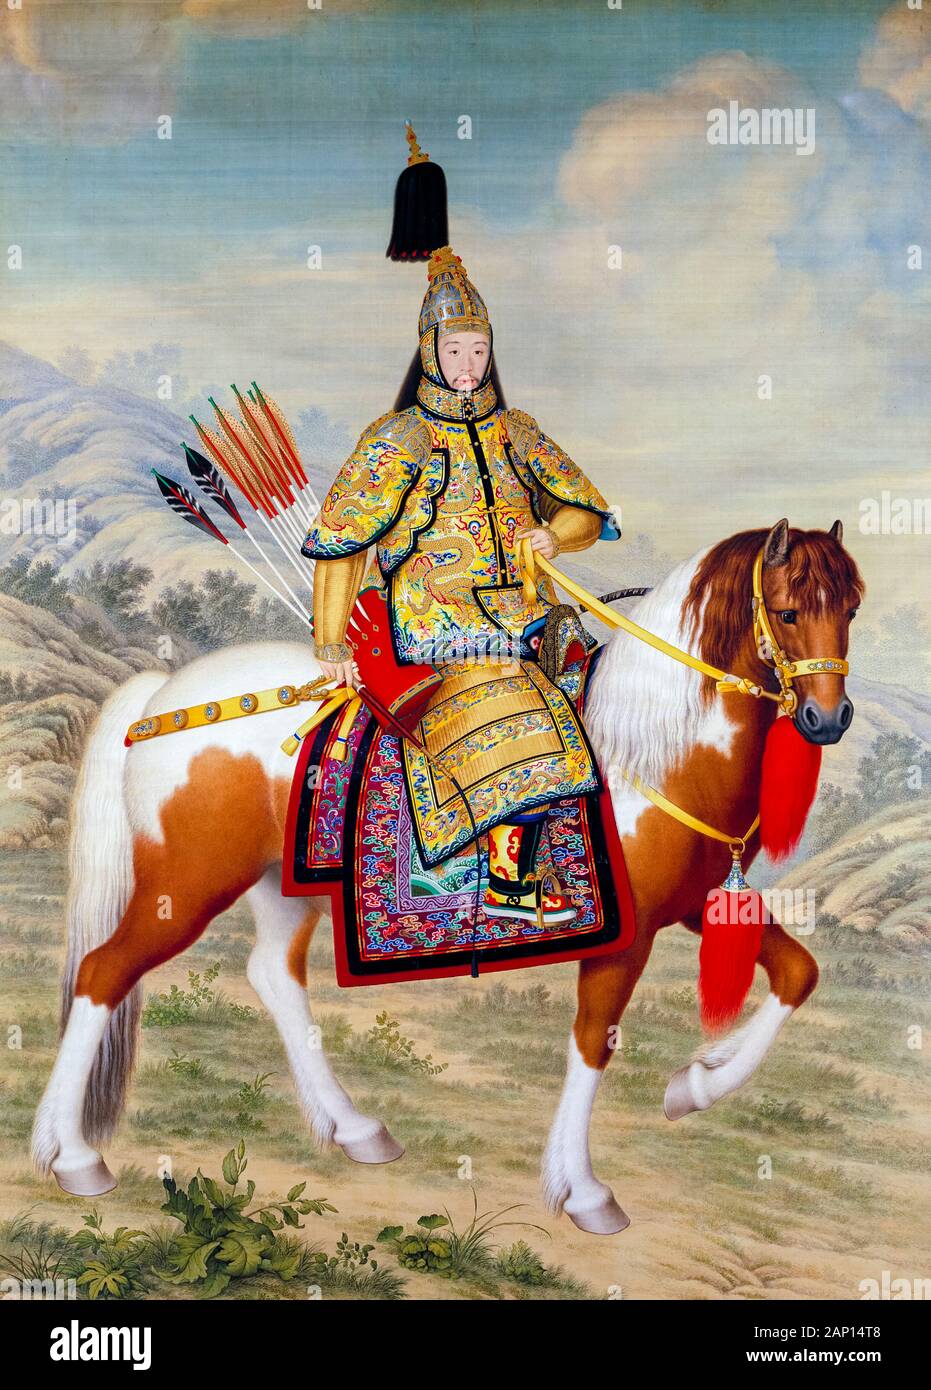 The Qianlong Emperor (1711-1799), equestrian portrait painting in Ceremonial Armour on Horseback by Giuseppe Castiglione, 1758 Stock Photo